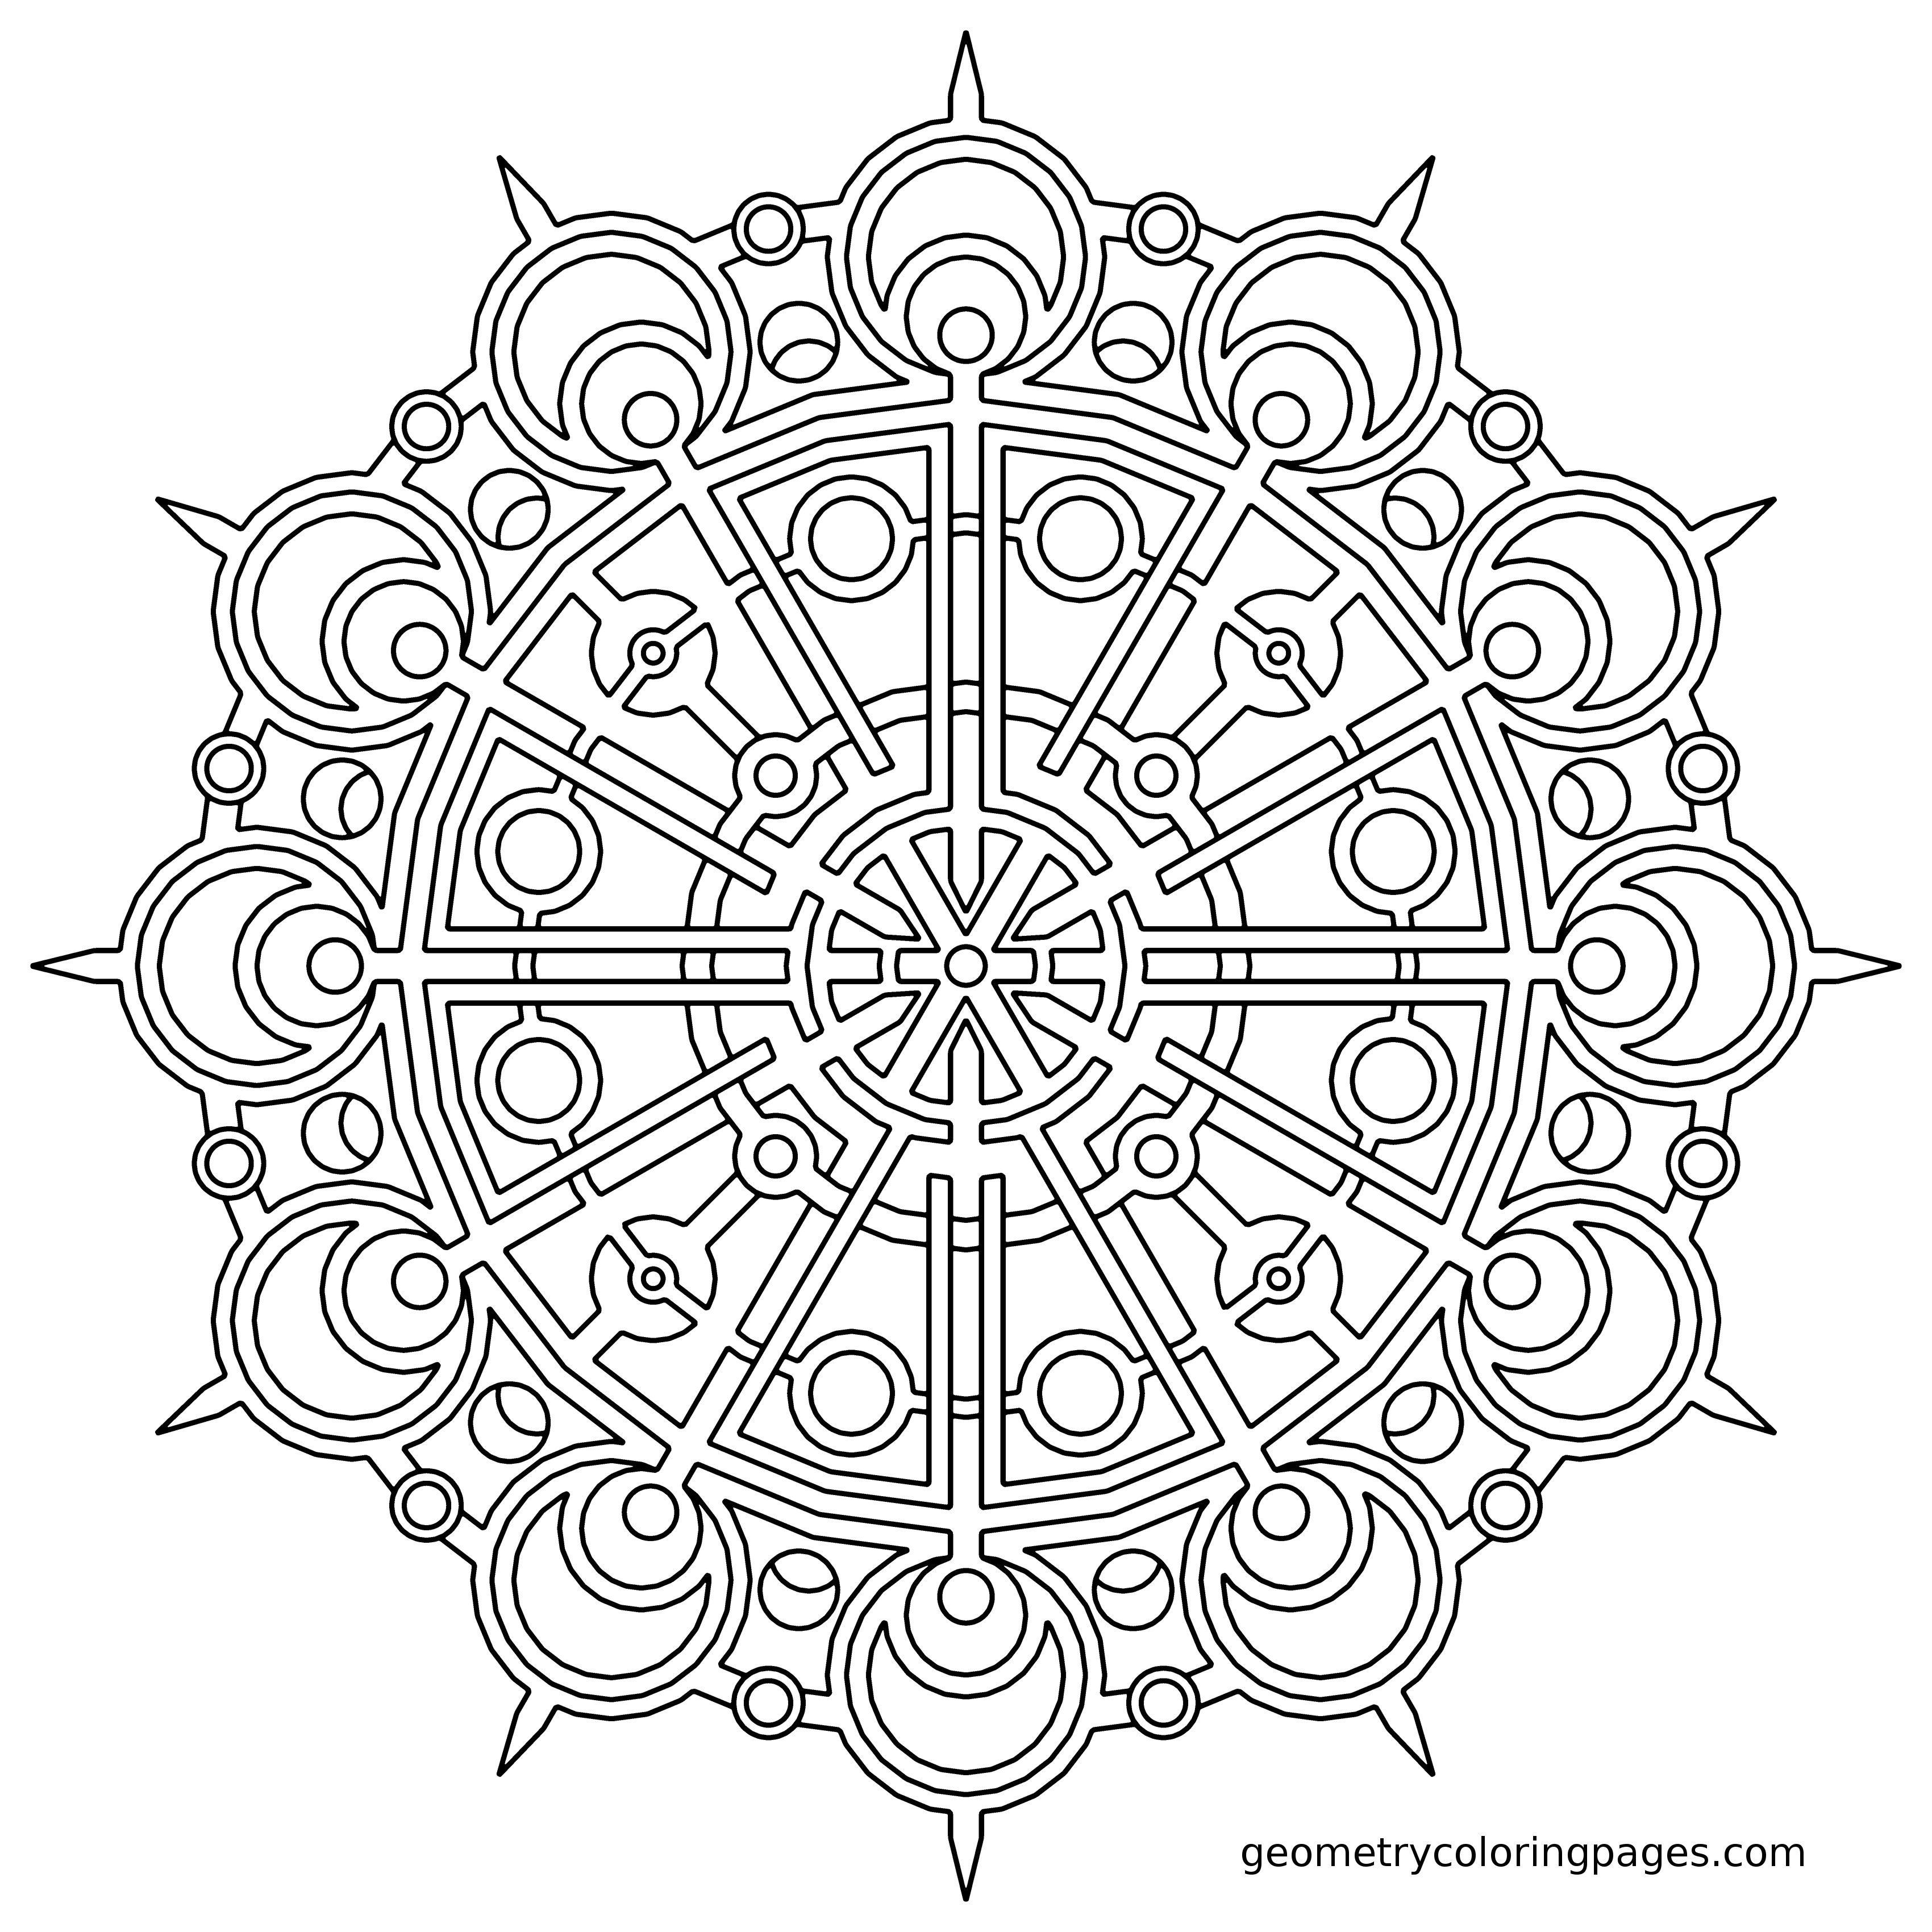 Geometric Mandala Coloring Pages - Coloring Home